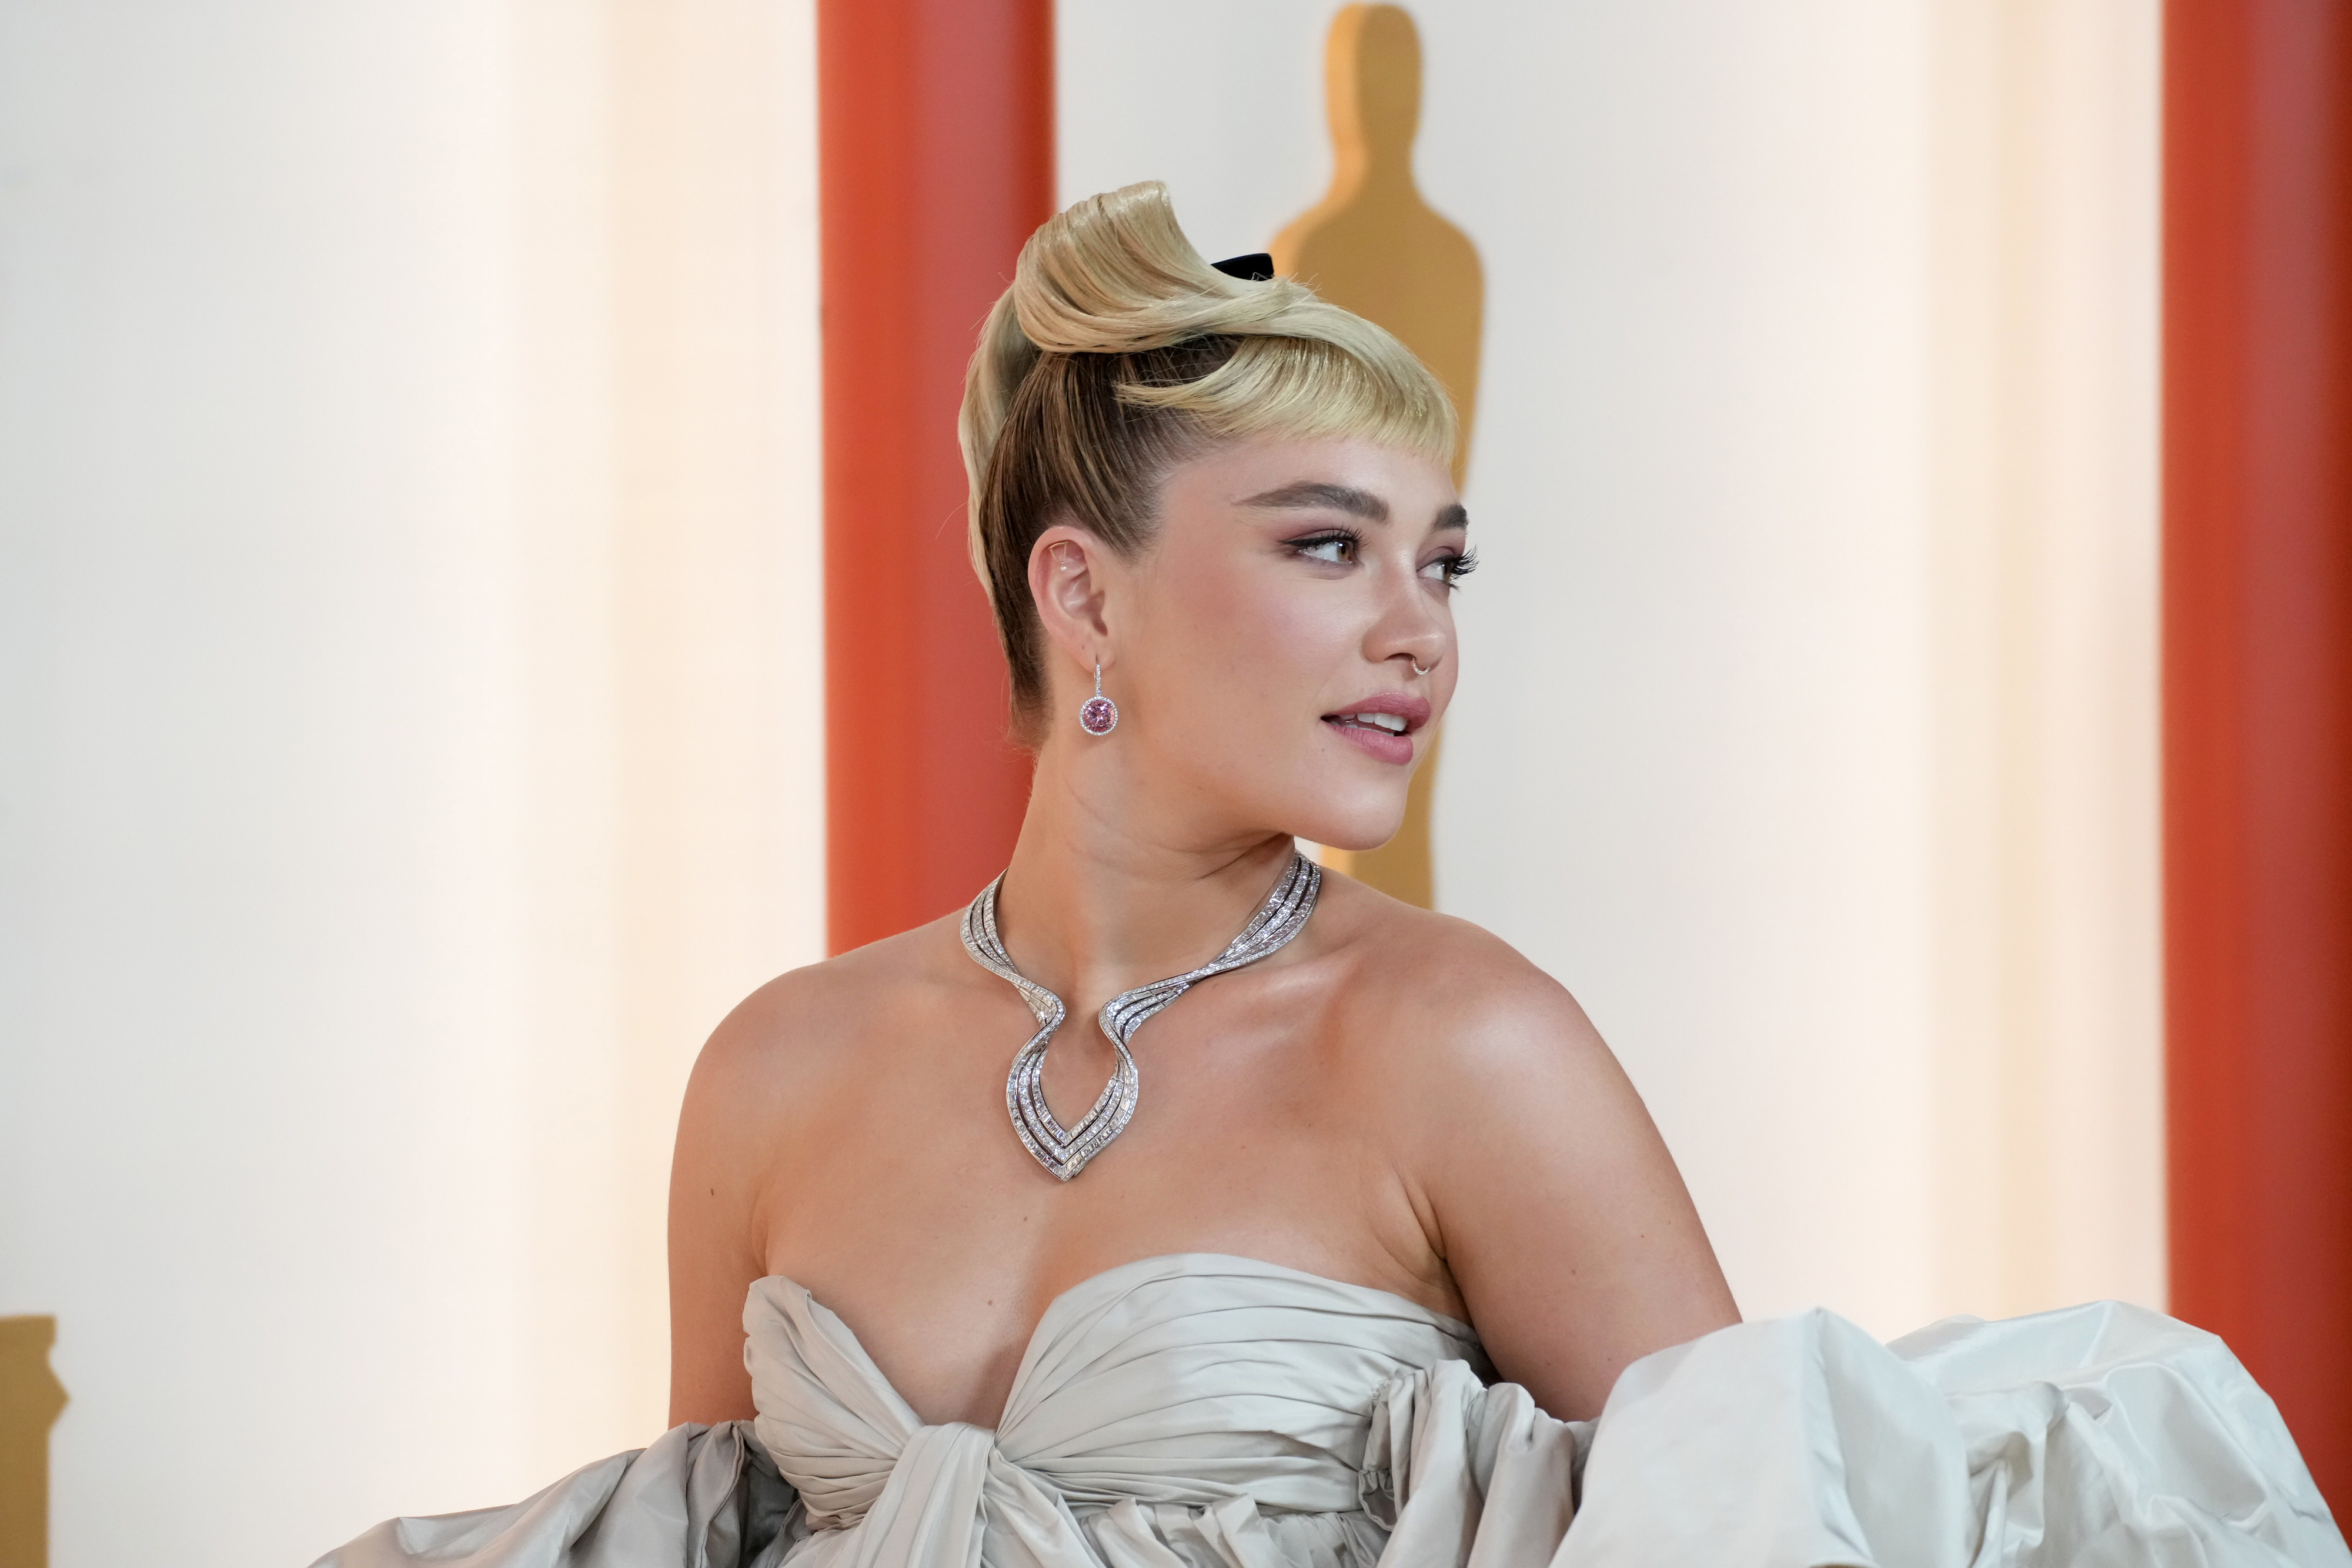 Close-up of Florence in a strapless outfit at a media event